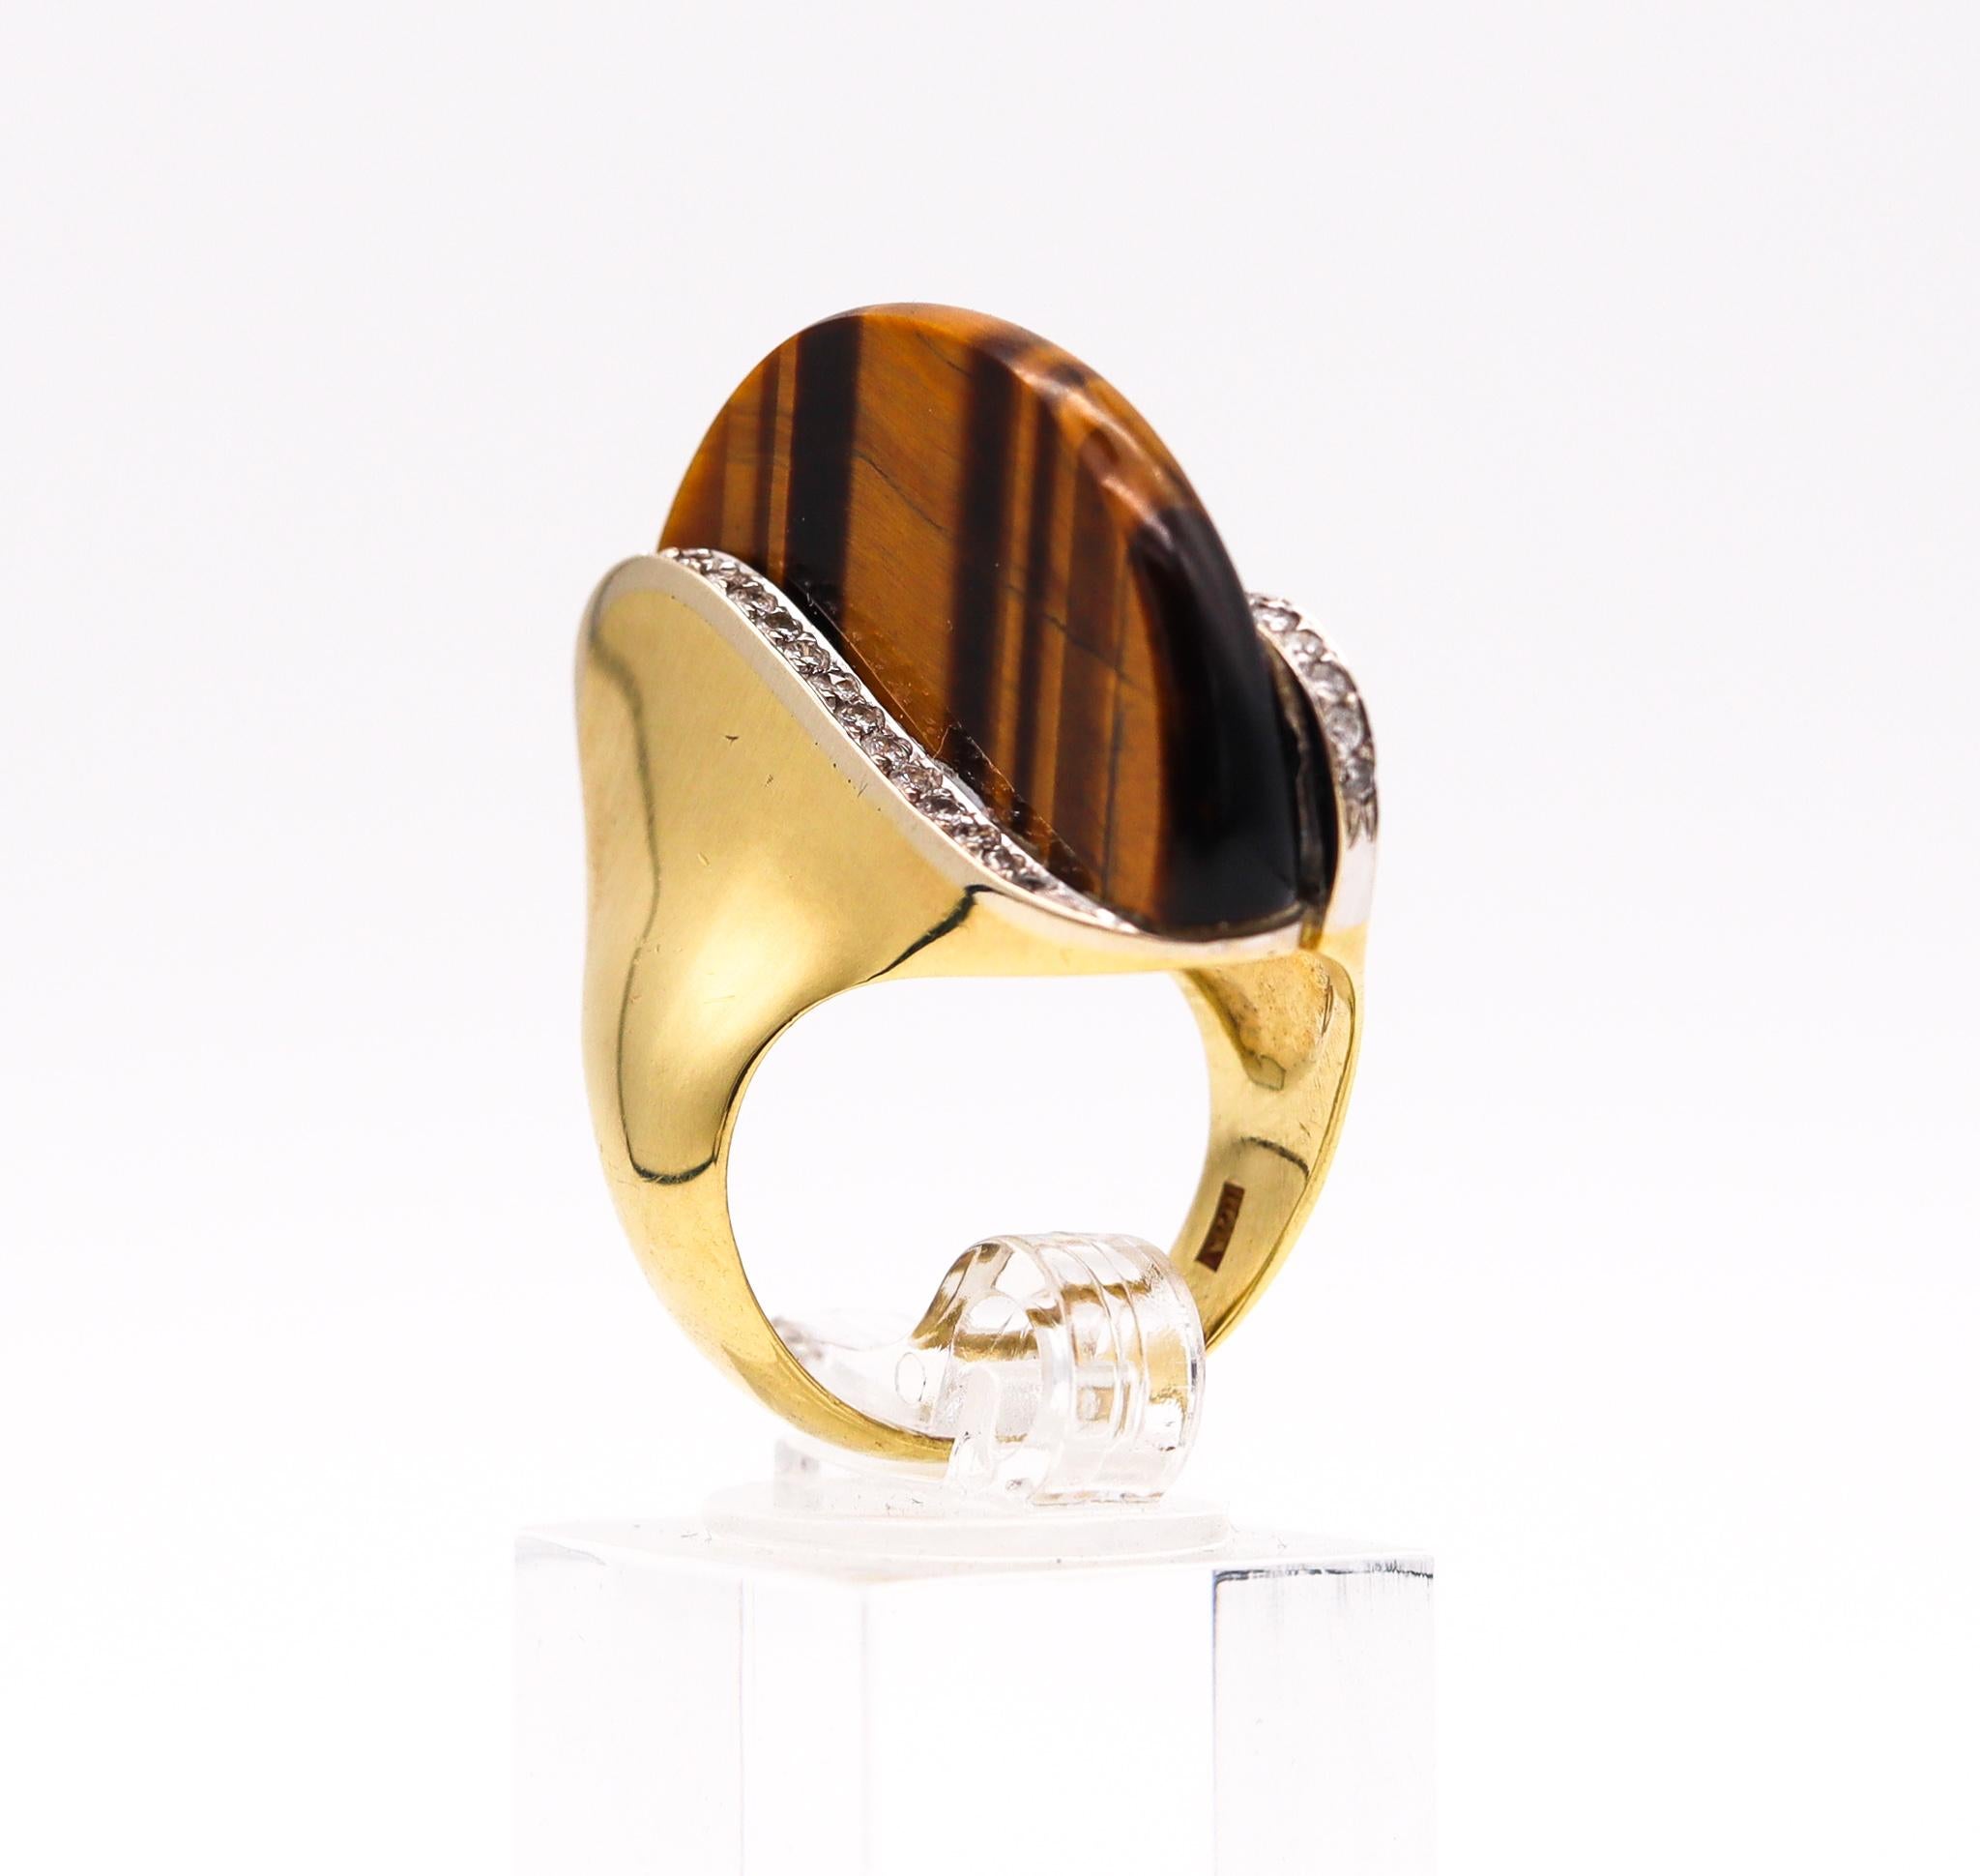 Women's Sculptural Retro 1970 Cocktail Ring 18kt Gold with Diamonds and Tiger Eye Quartz